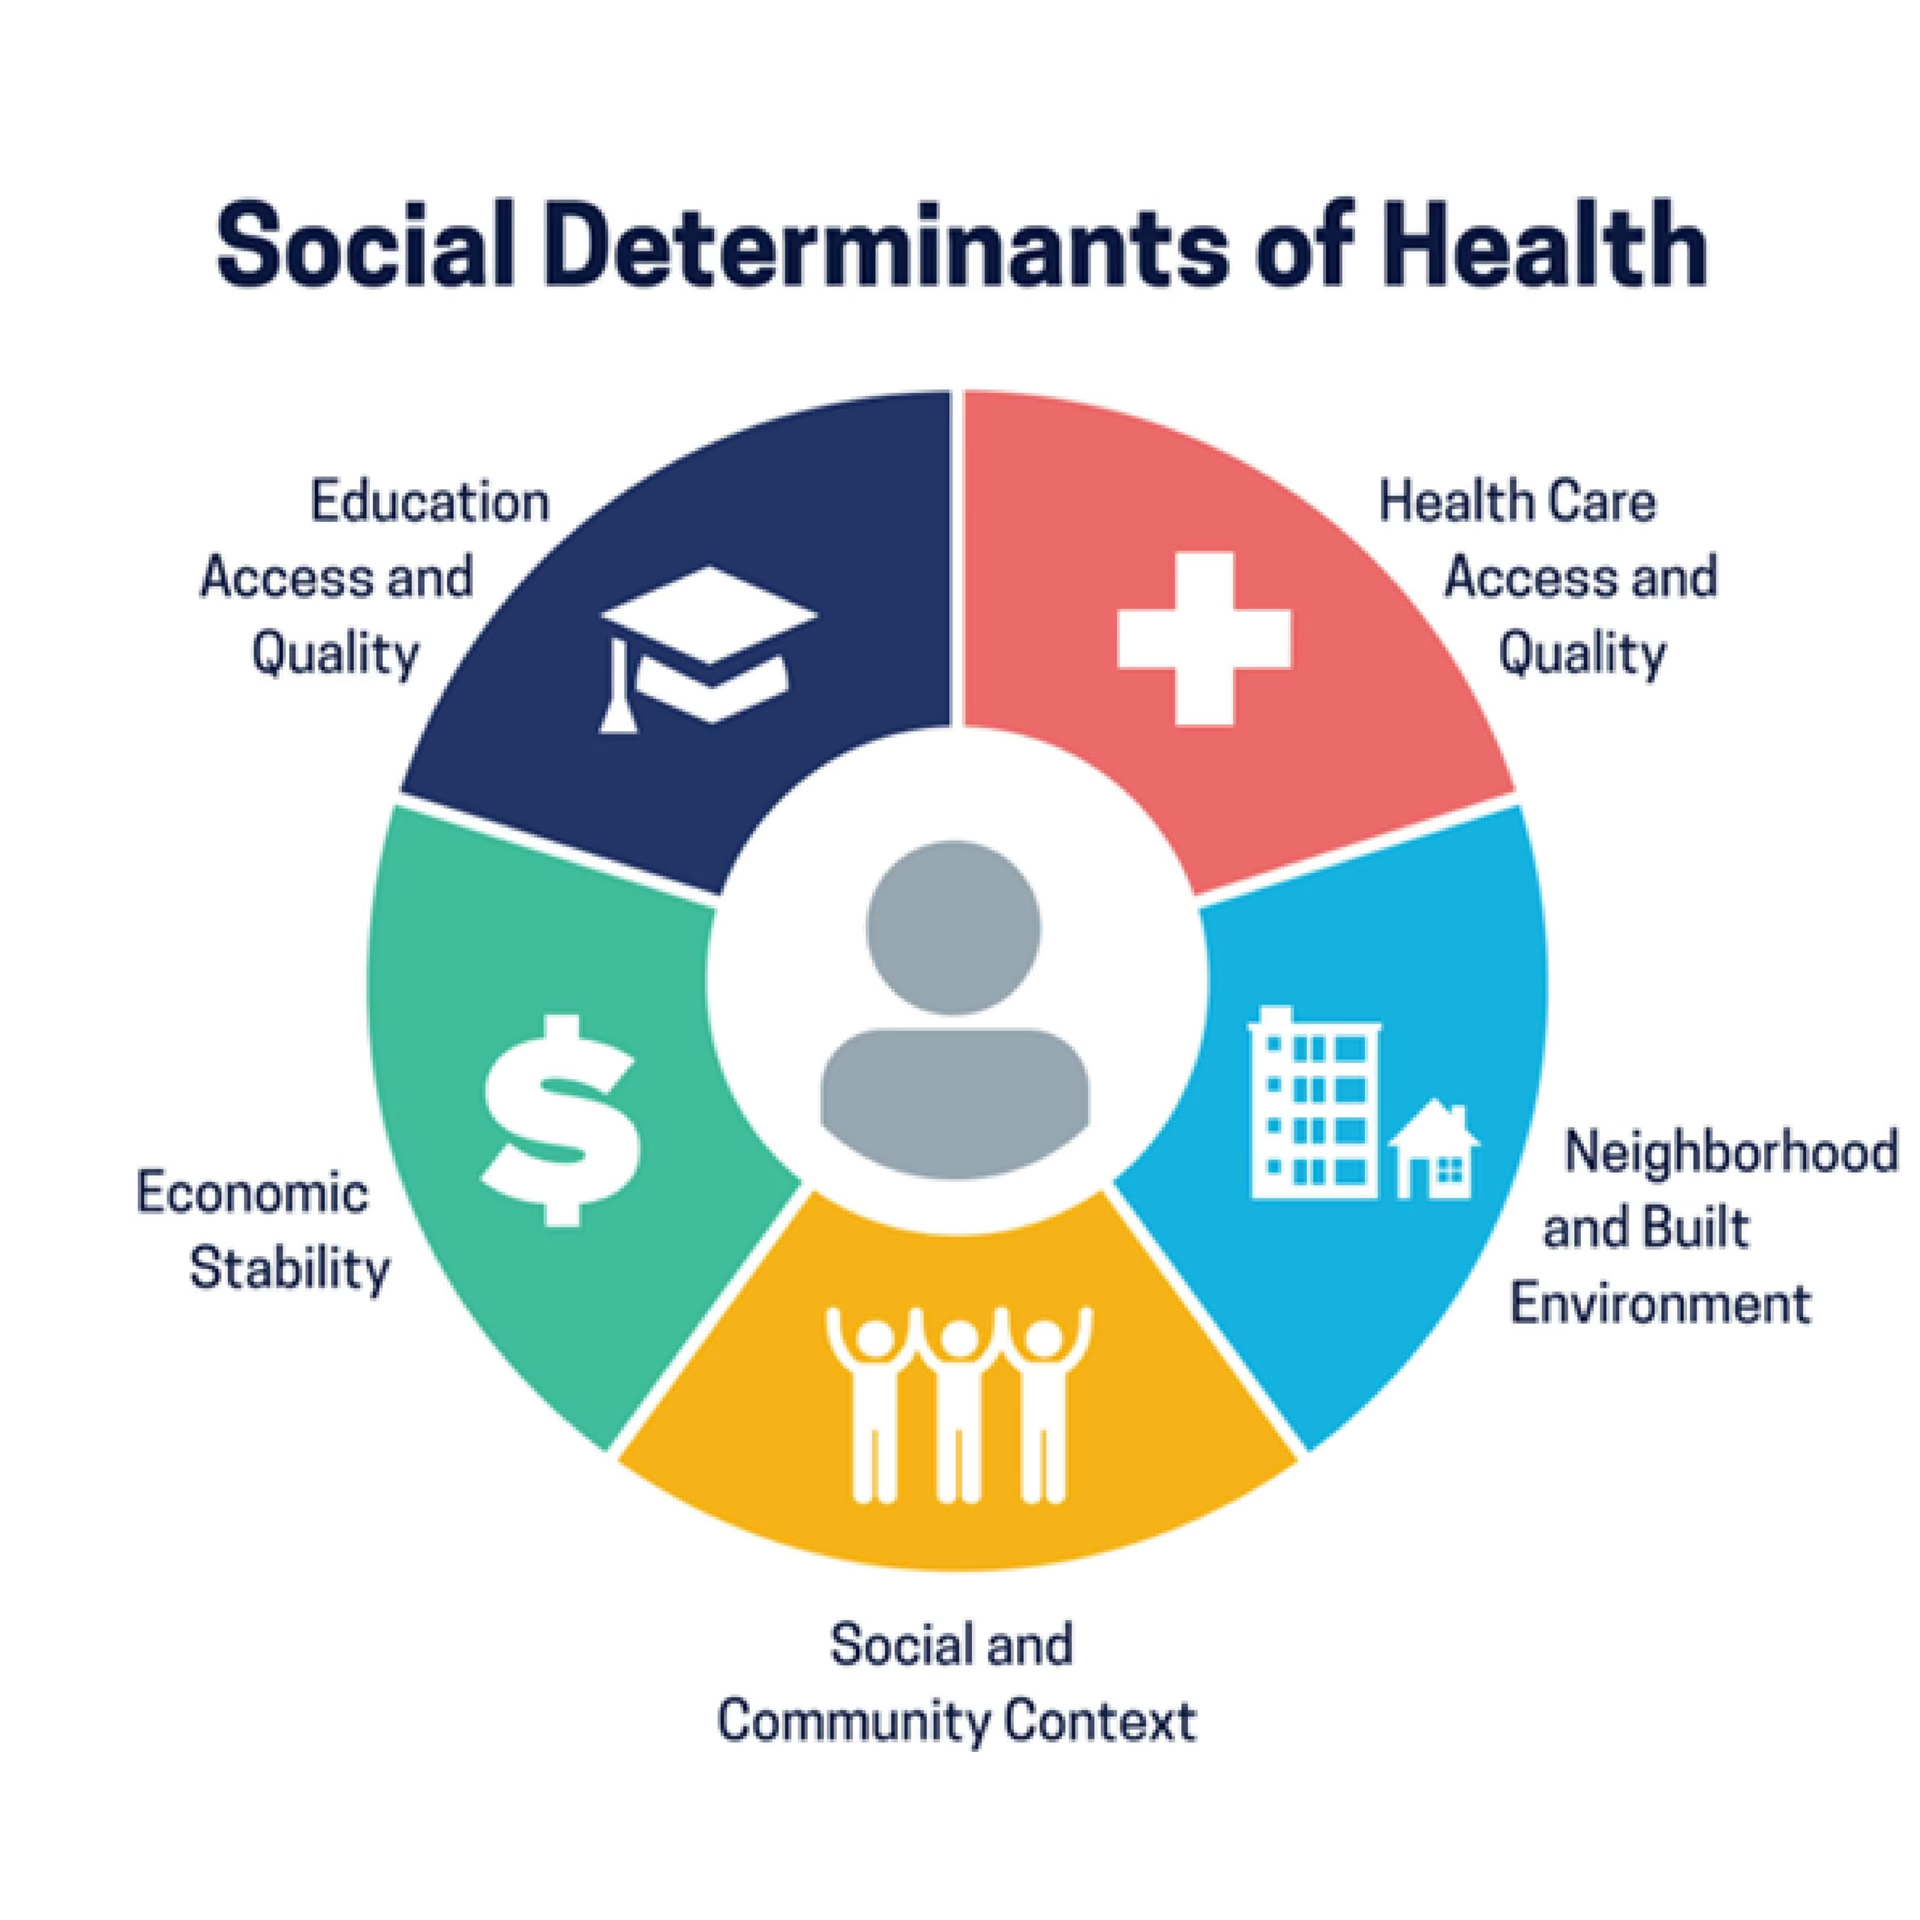 What are the Social Determinants of Health?